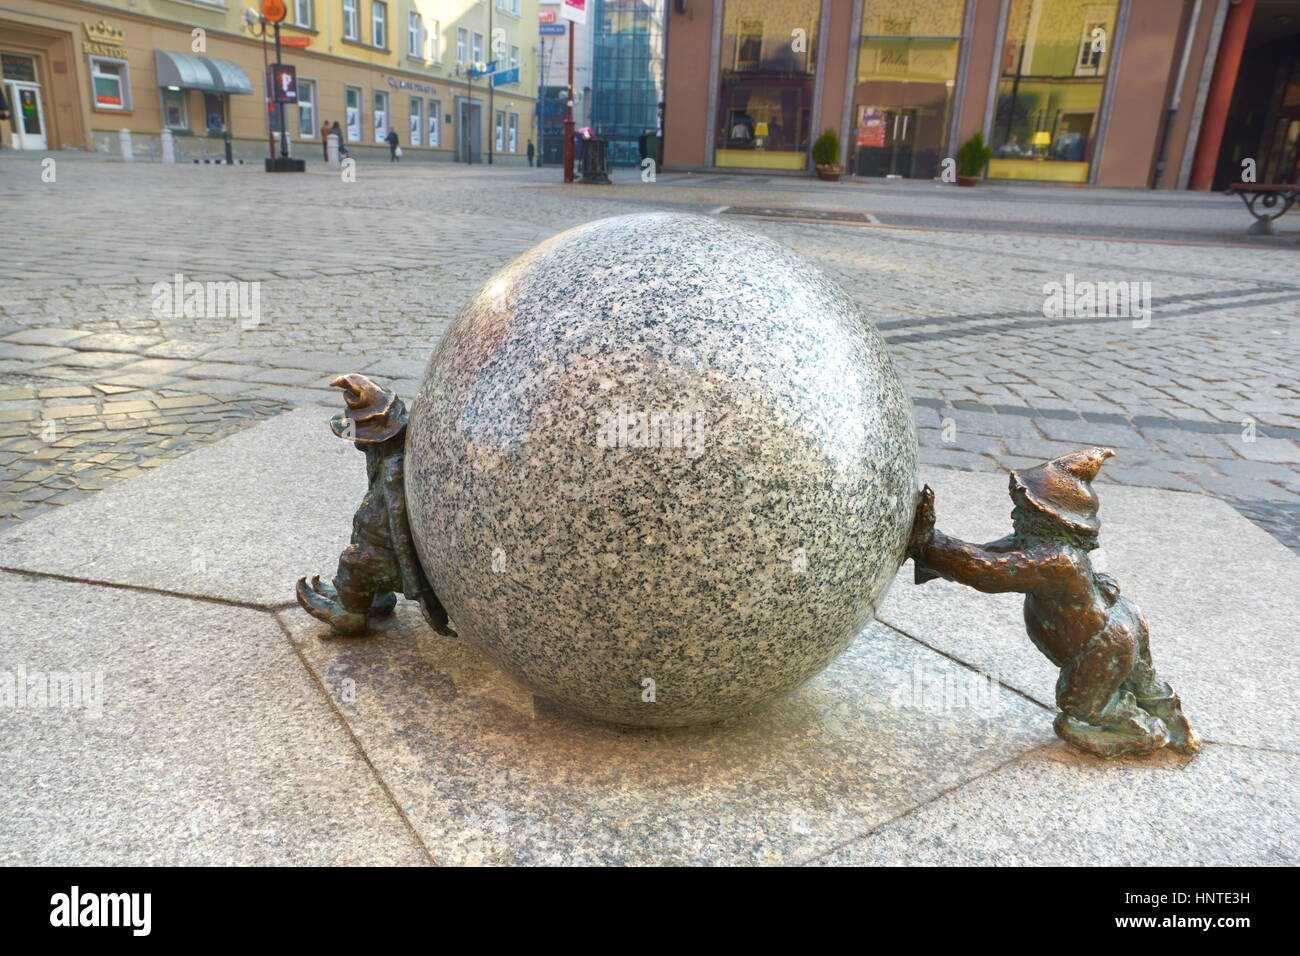 Nain de Wroclaw (petite rue sculptures), Wroclaw, Pologne, Europe Banque D'Images